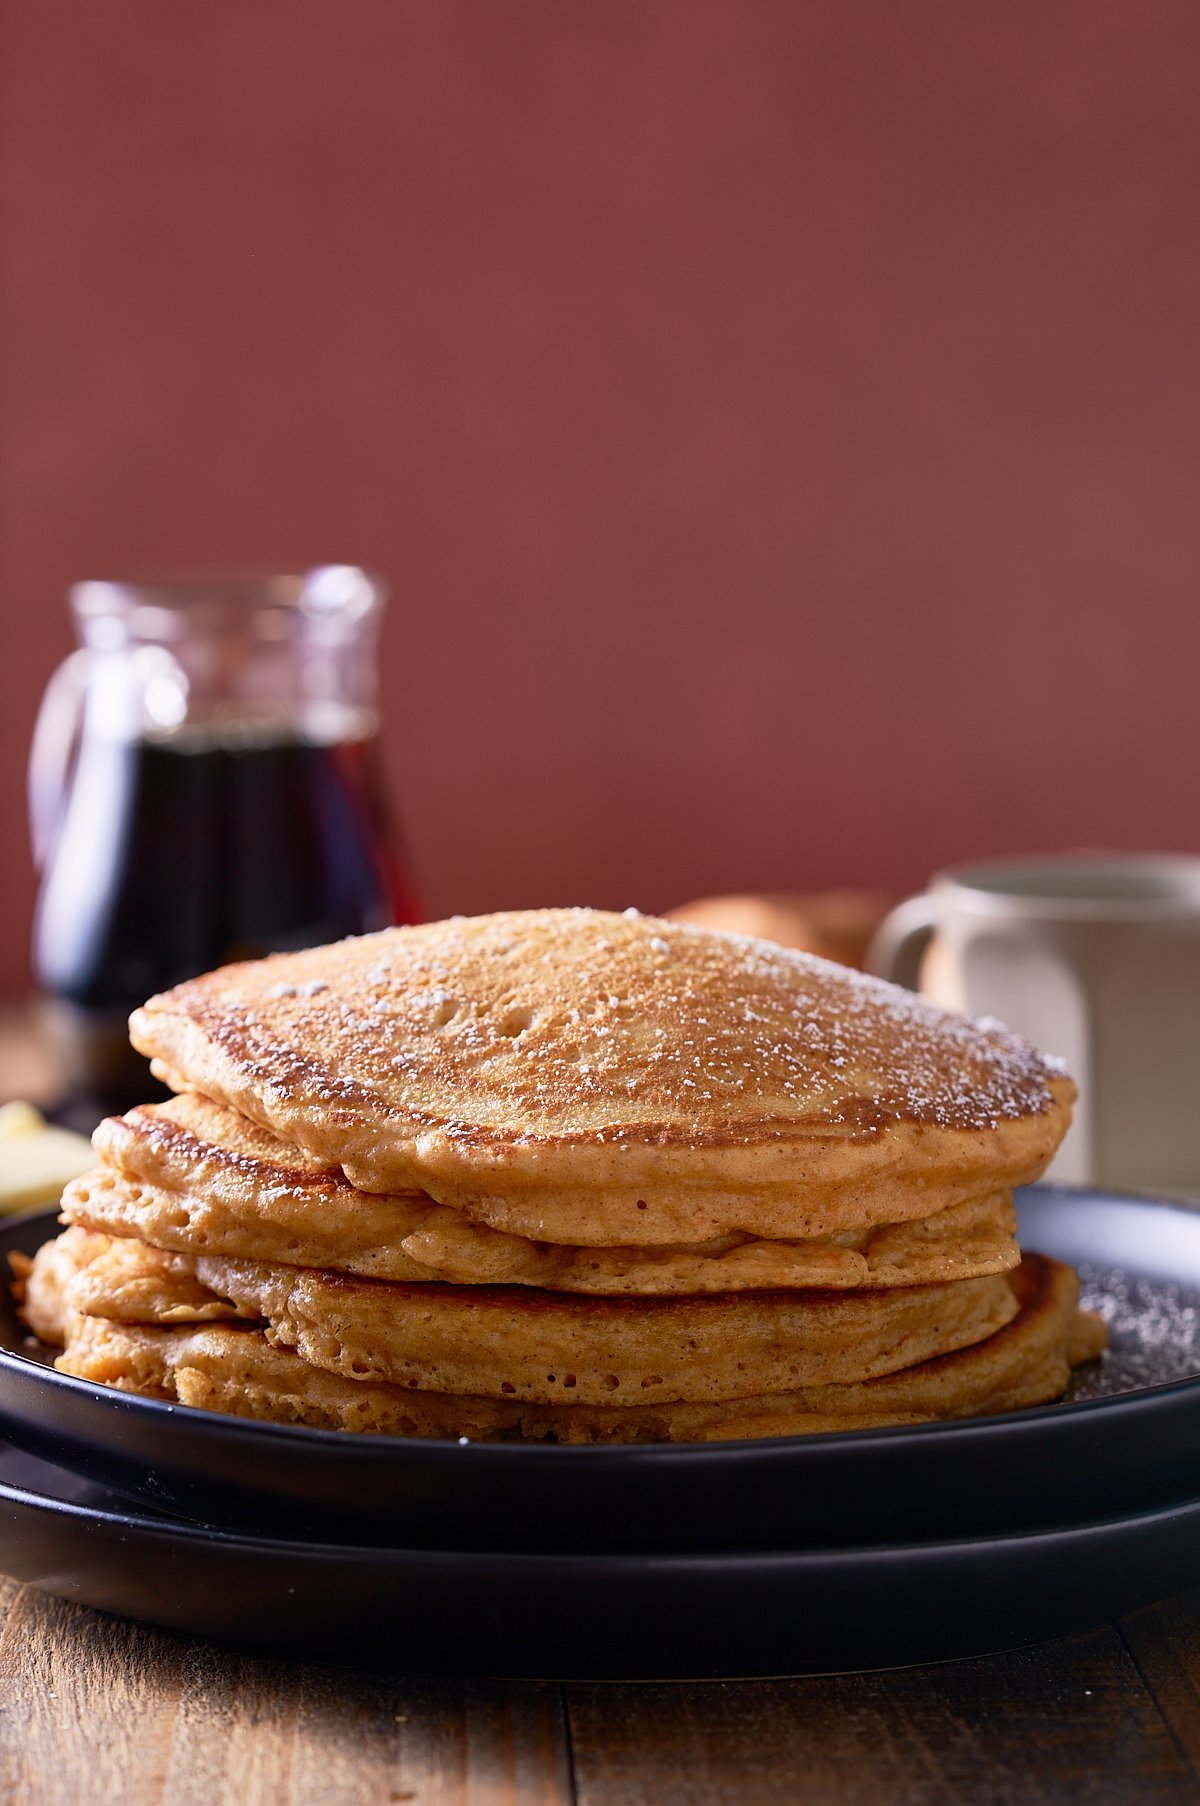 A stack of sweet potato pancakes on a black plate with a jug of maple syrup served alongside.